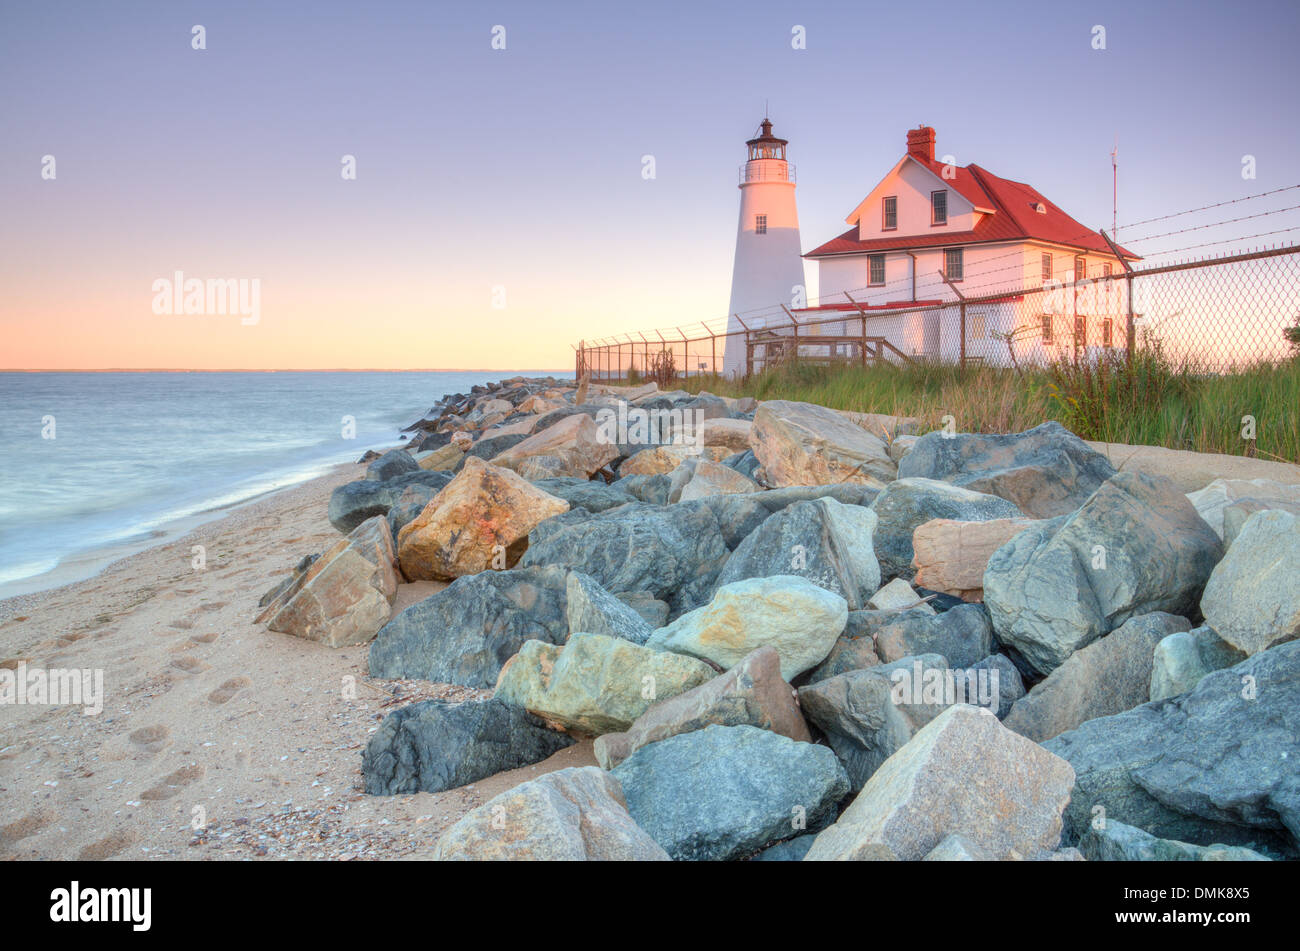 Cove Point Lighthouse in Maryland Foto Stock